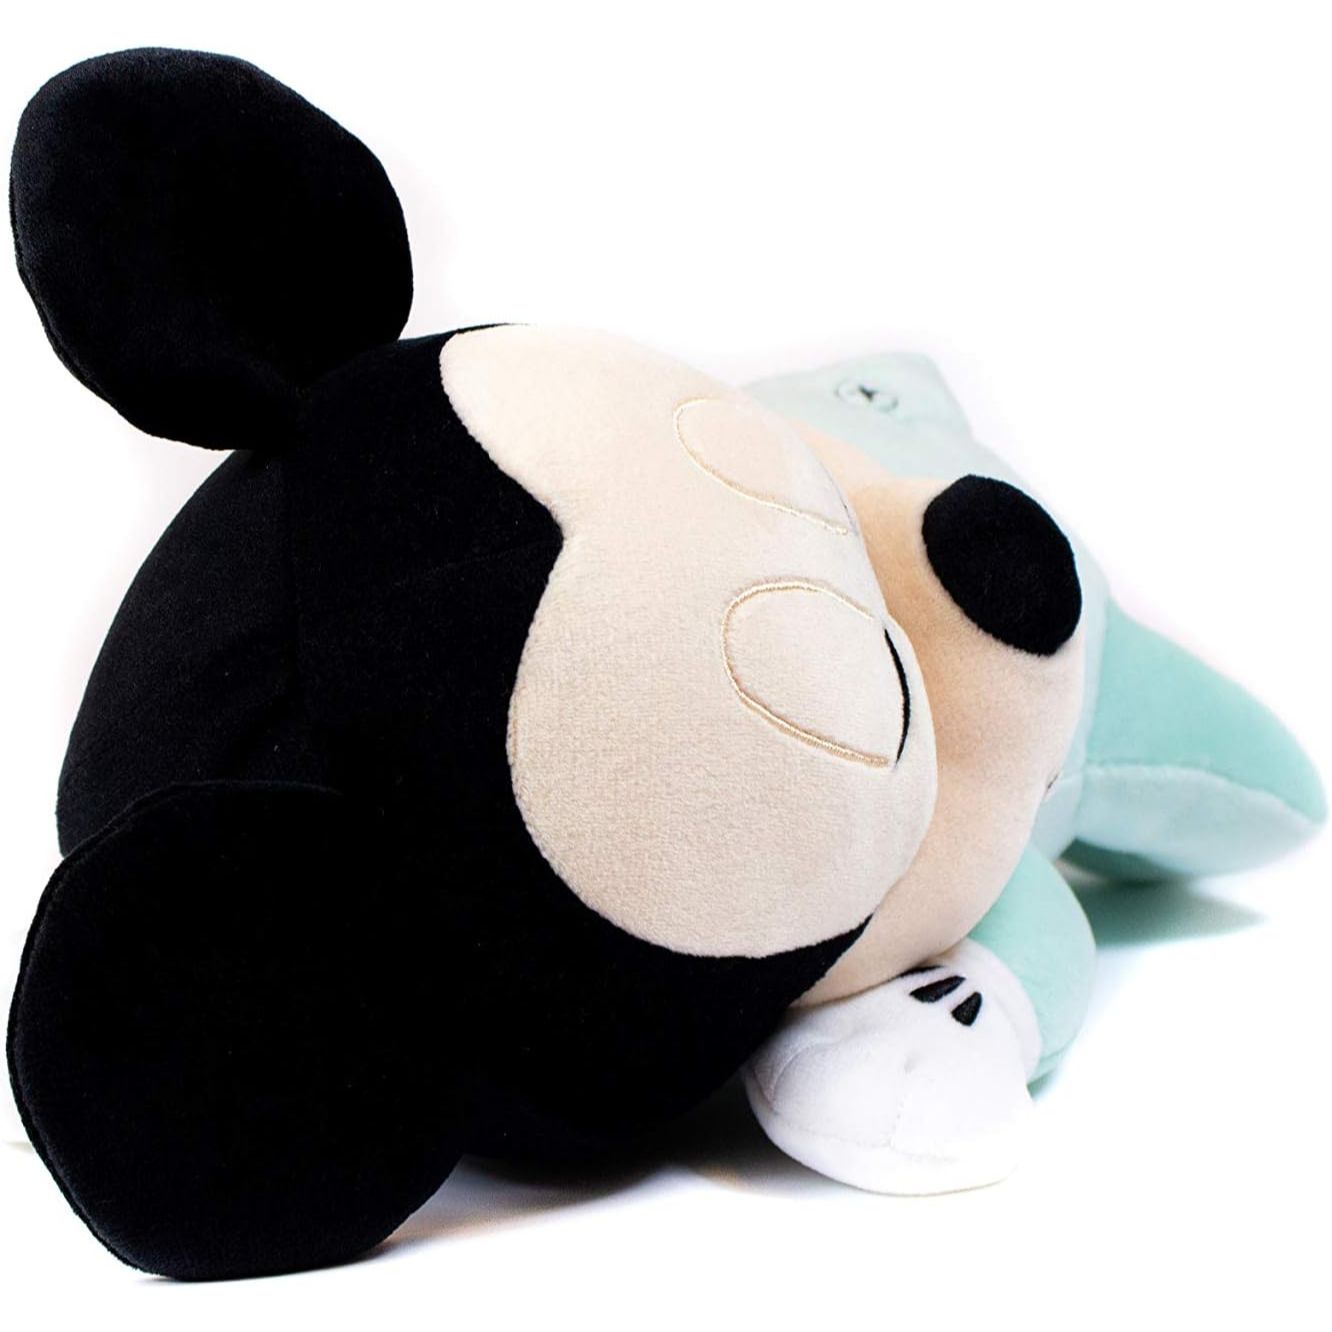 Mickey Mouse Sleeping baby face view - Heretoserveyou